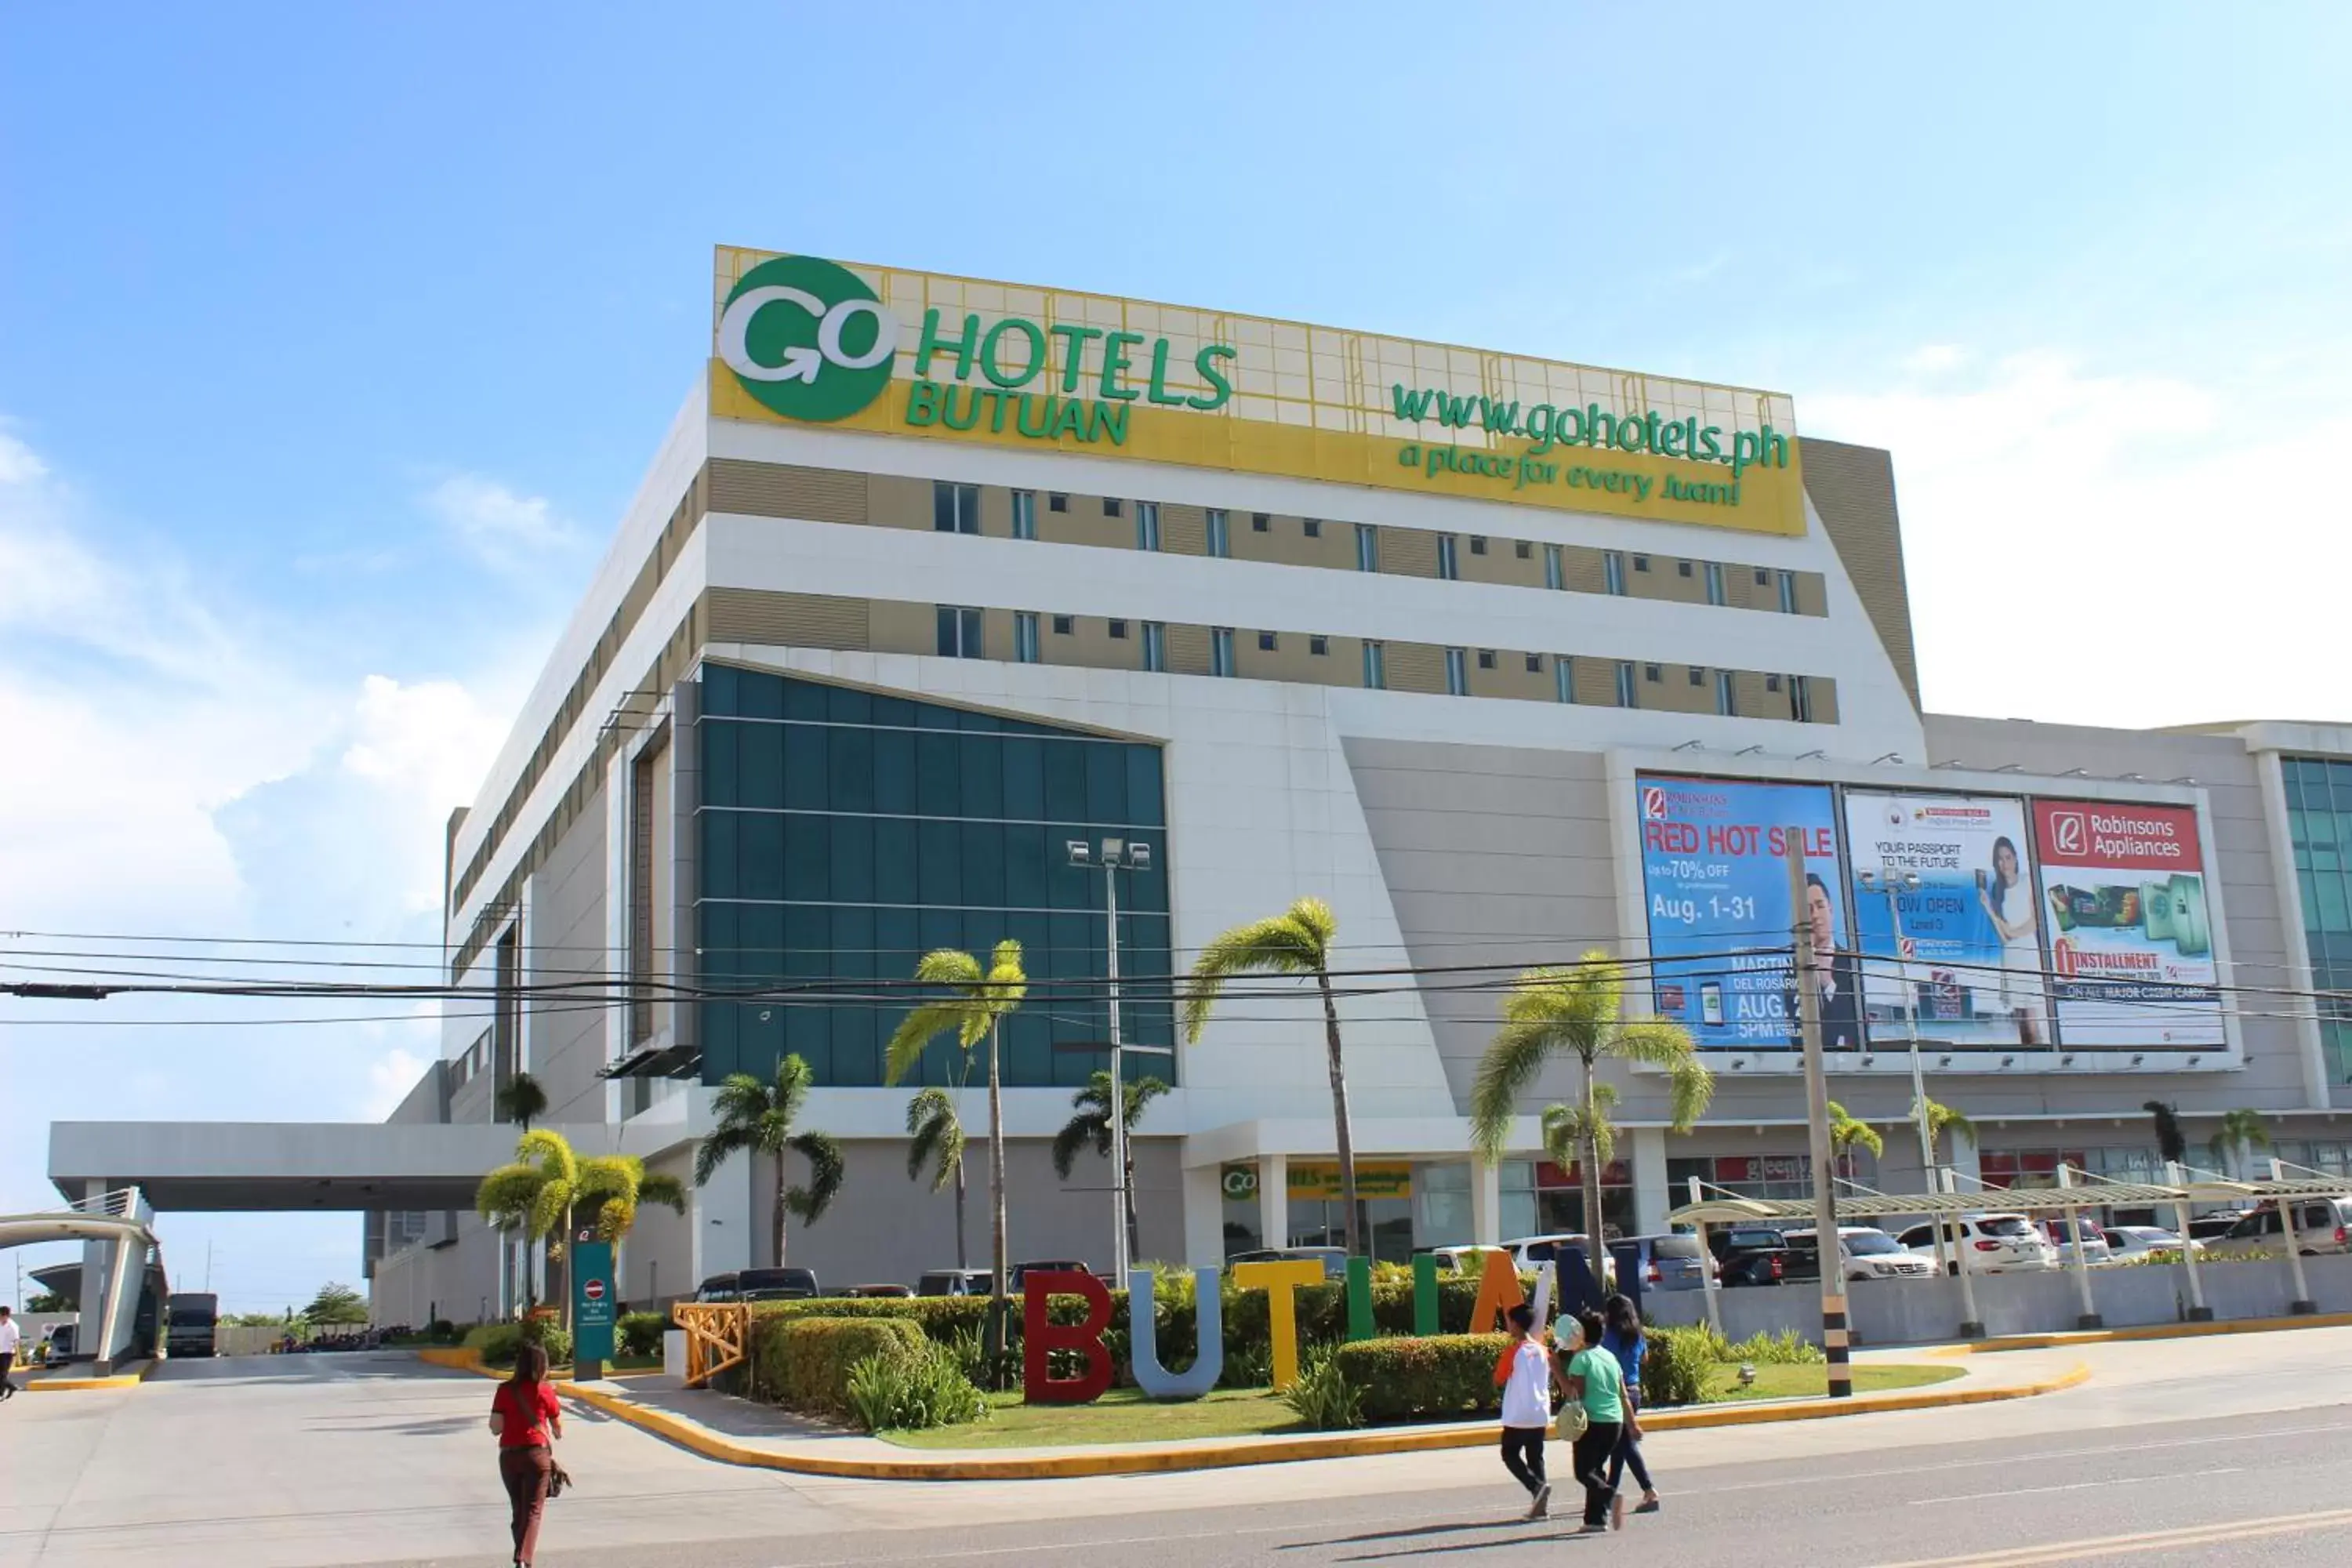 Property Building in Go Hotels Butuan